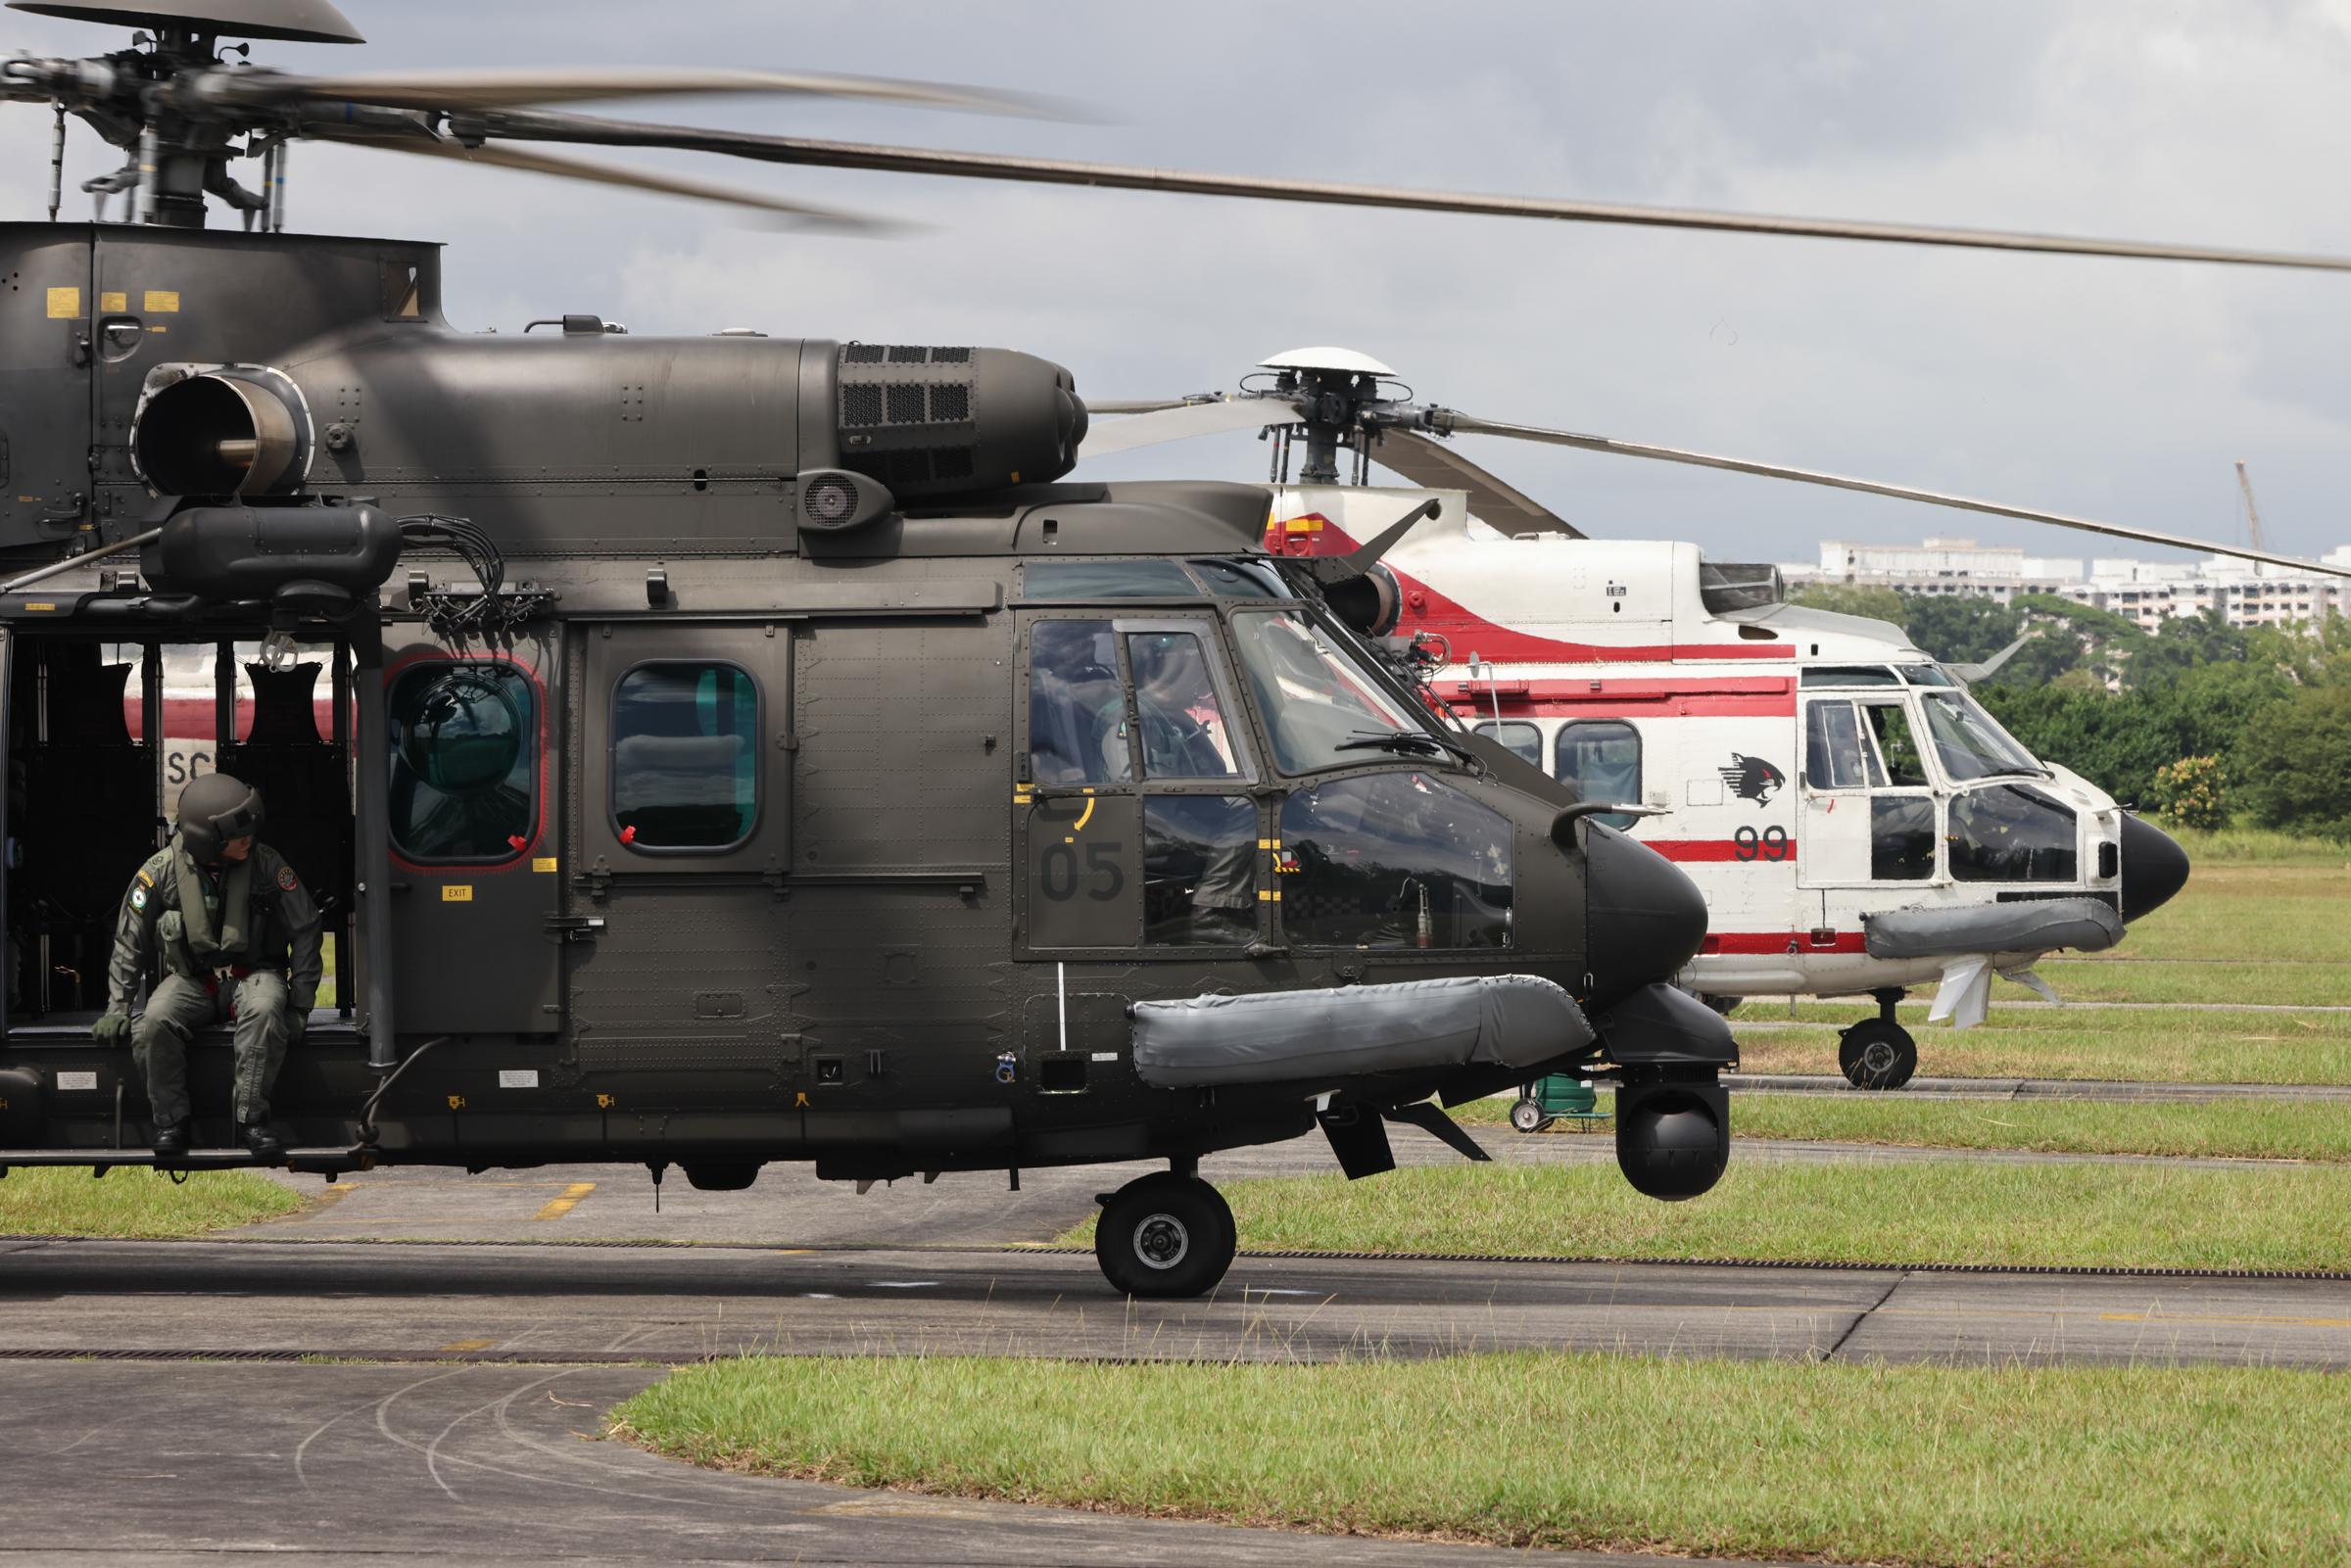 An Exclusive Look At Singapore's New H225M Helicopter | Aviation Week Network